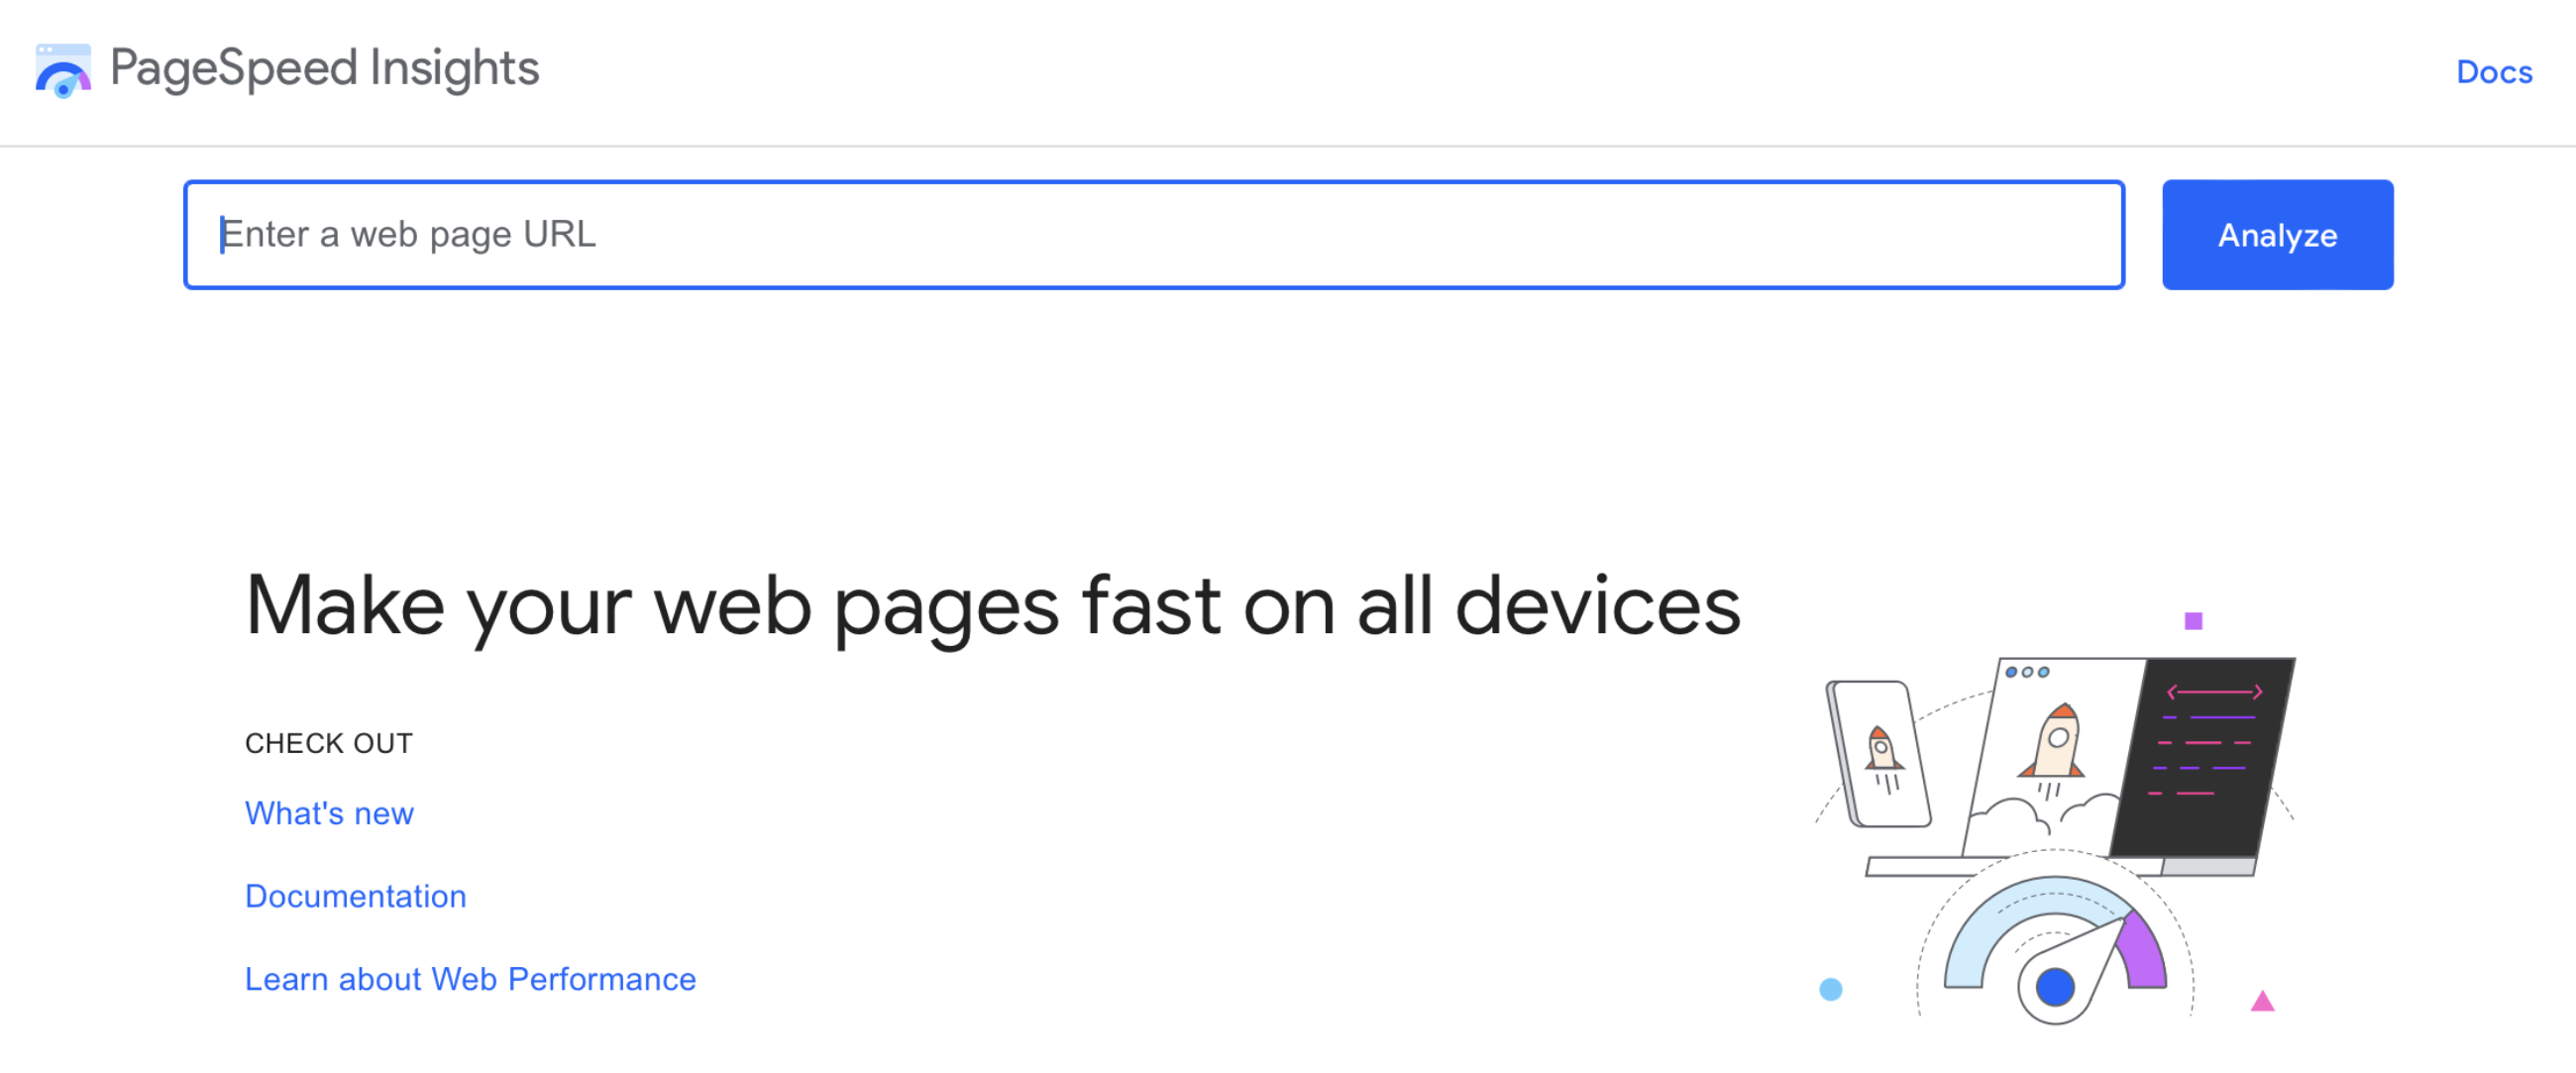 Homepage of Google's PageSpeed Insights with a form to enter the url you want to analyze as well as a button to start the audit.